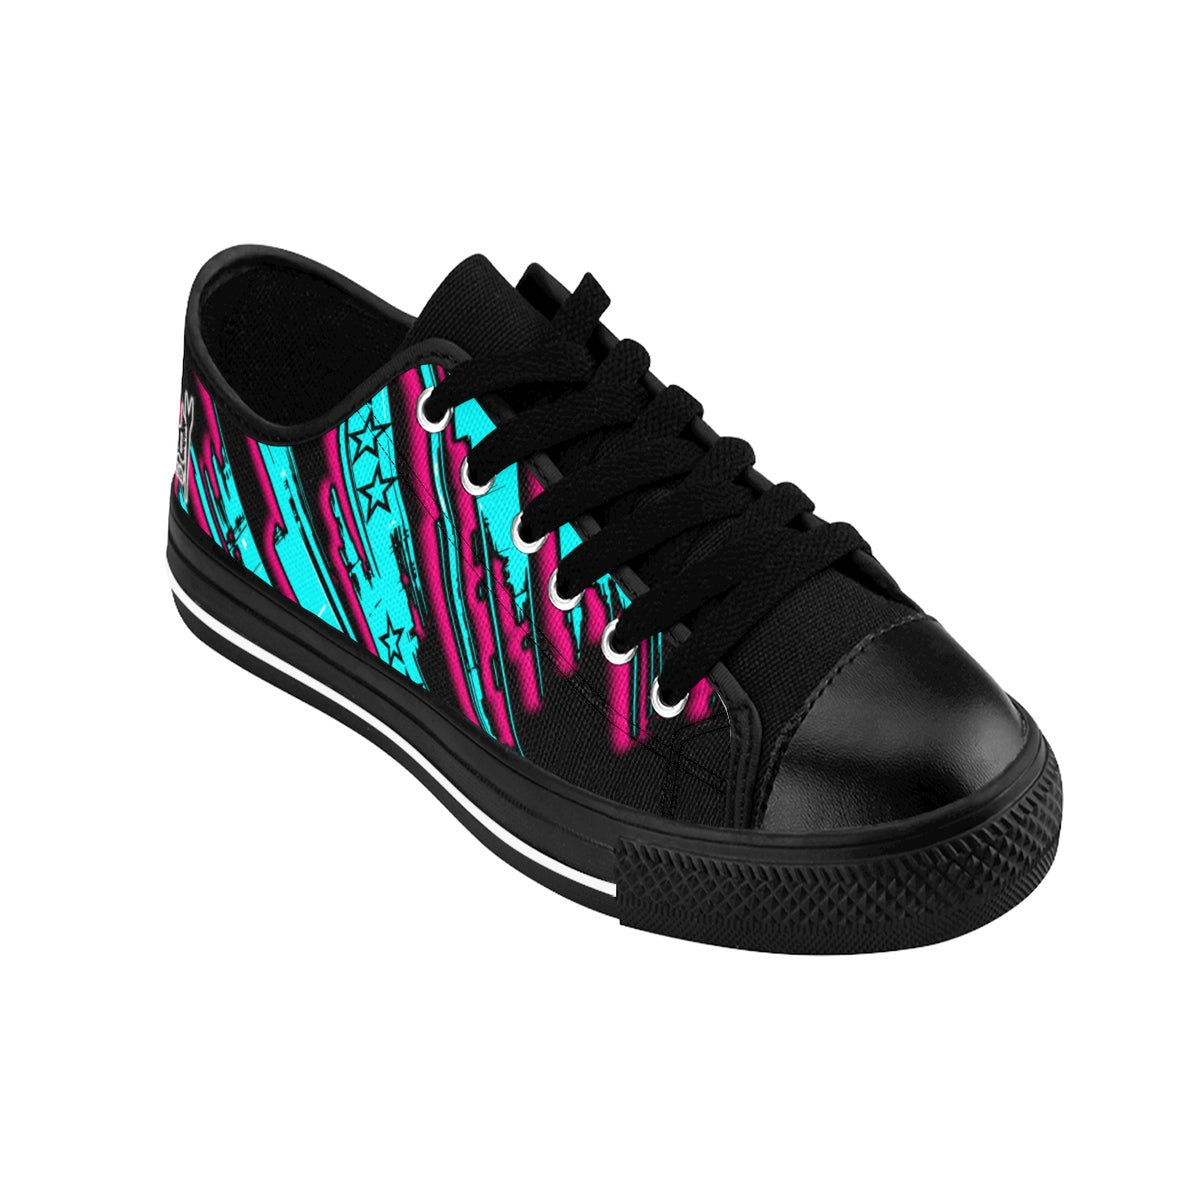 The Edge of Insanity / Teal/ Pink Black/ Women's Sneakers